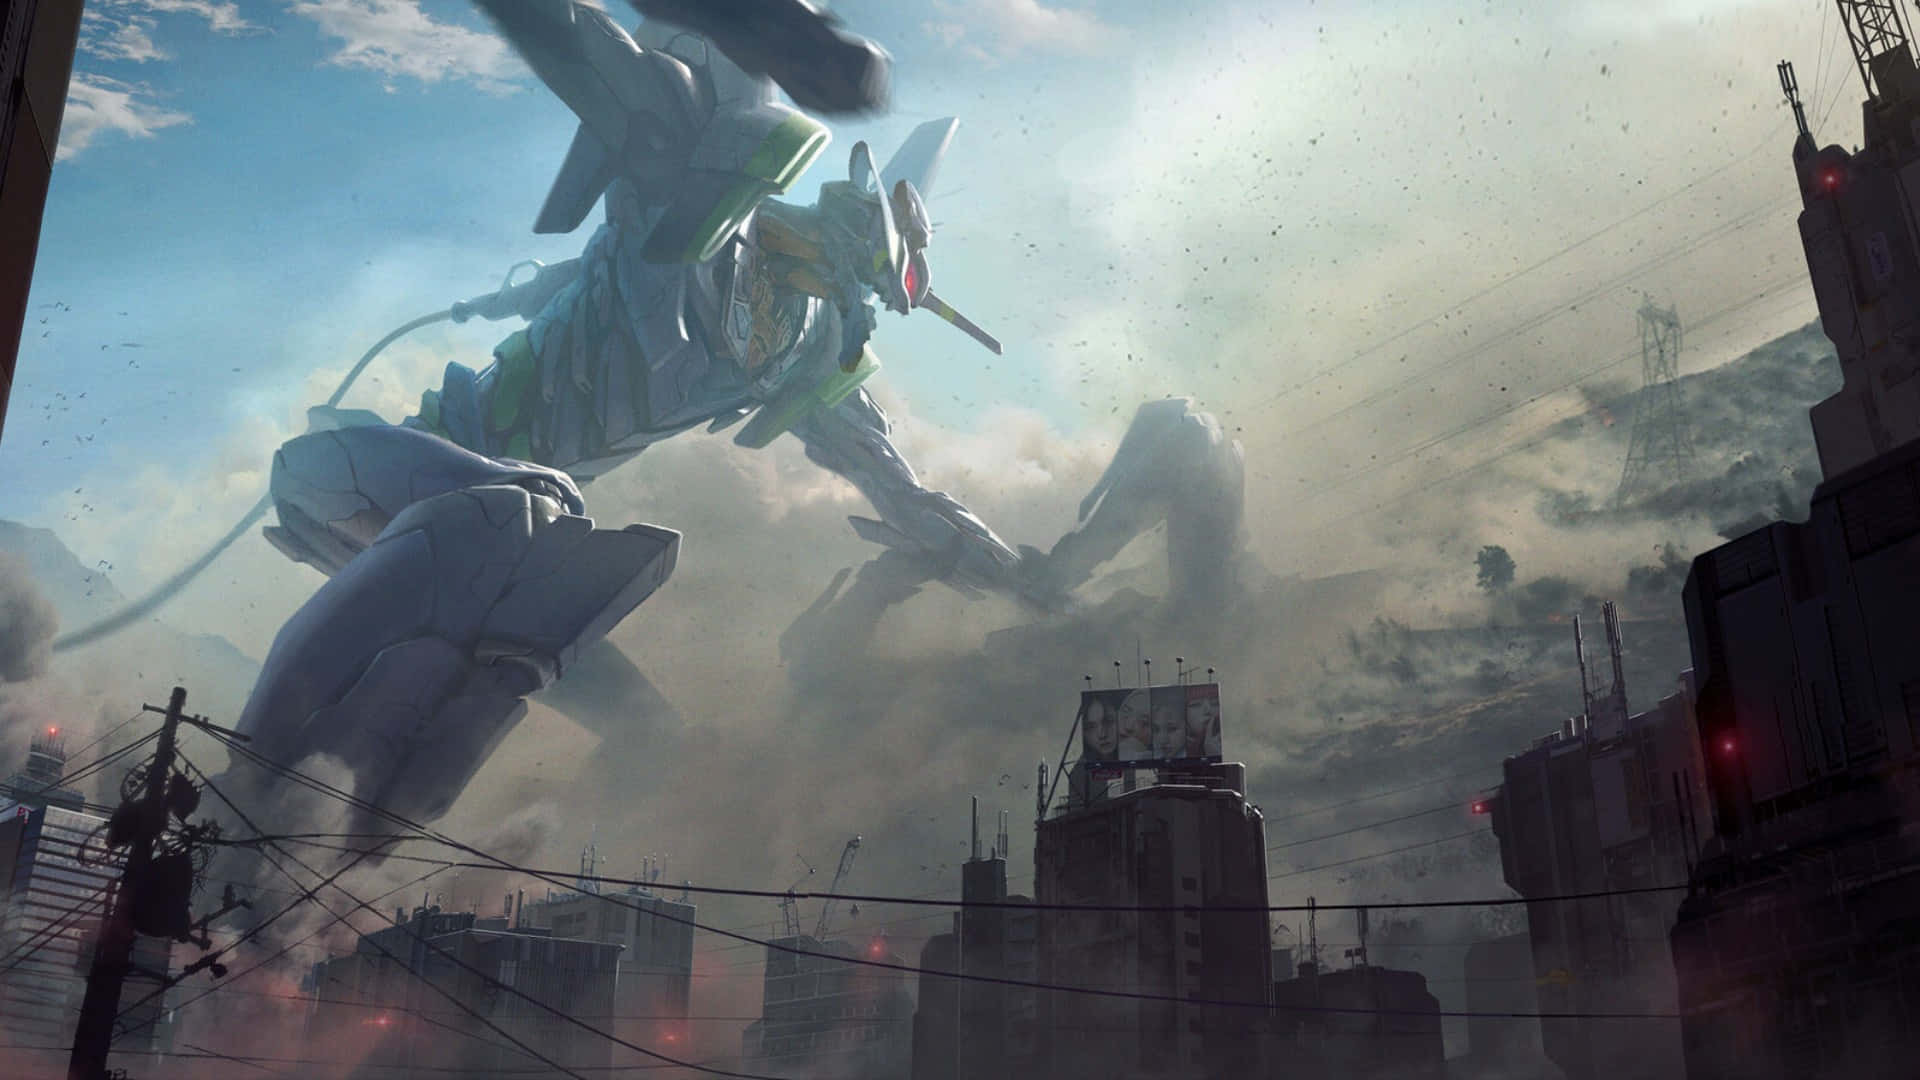 A Giant Robot Is Flying Over A City